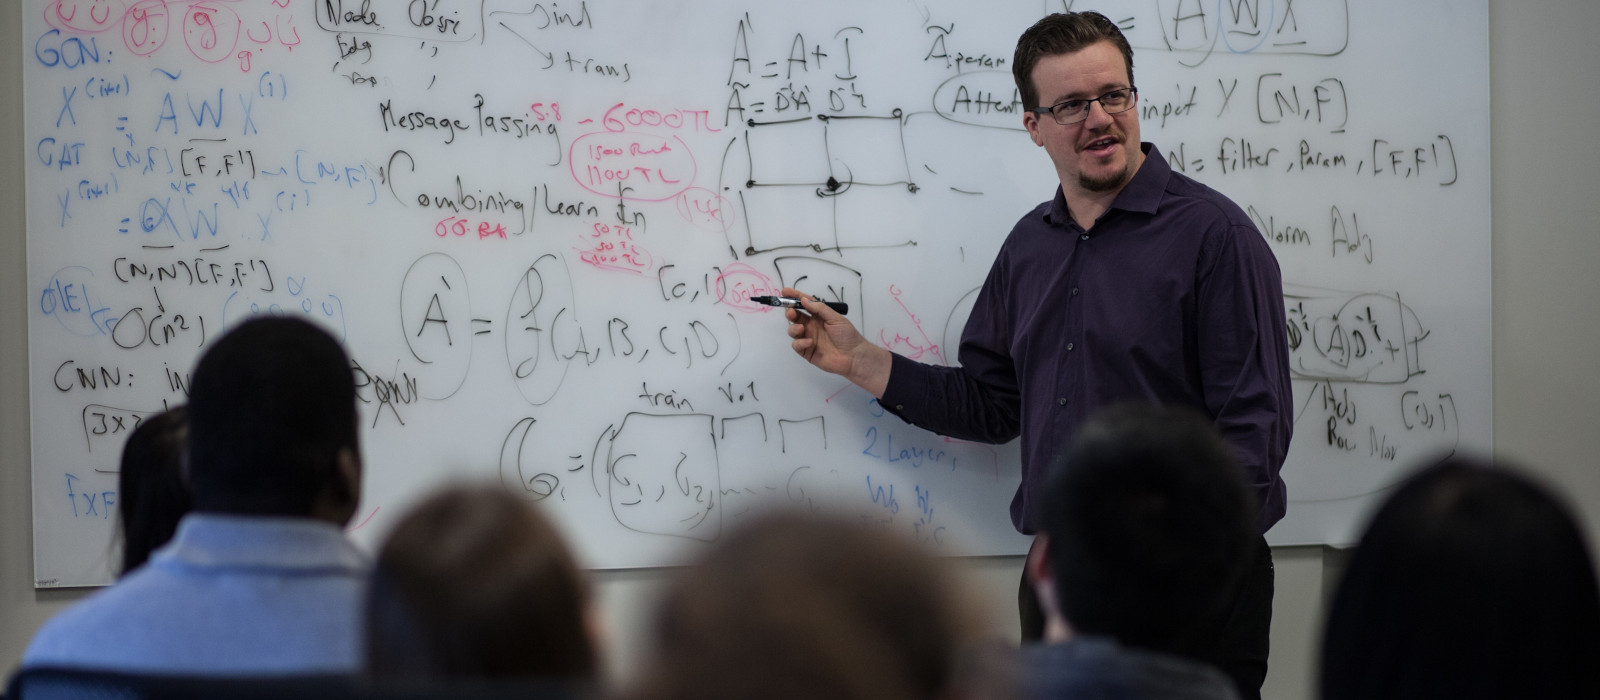 A man with glasses stands points at a white board with formulas on it.